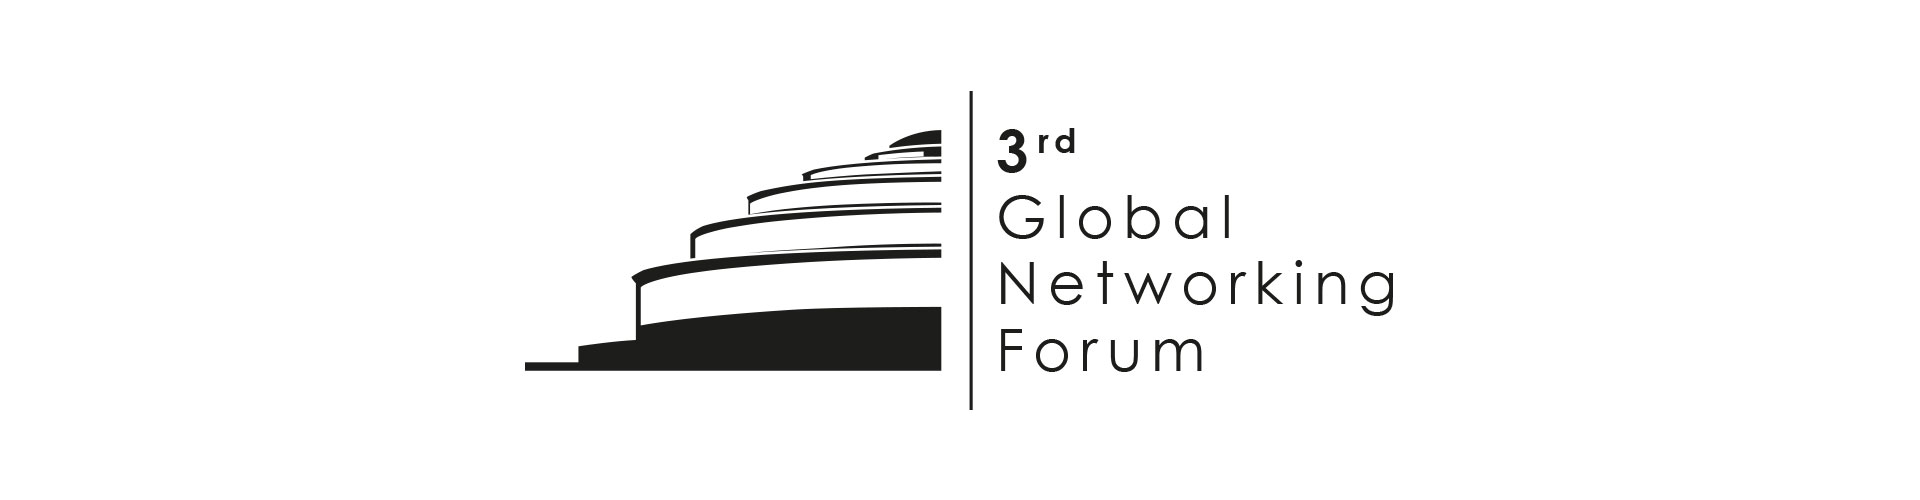 Wolontariat podczas 3rd Global Networking Forum!